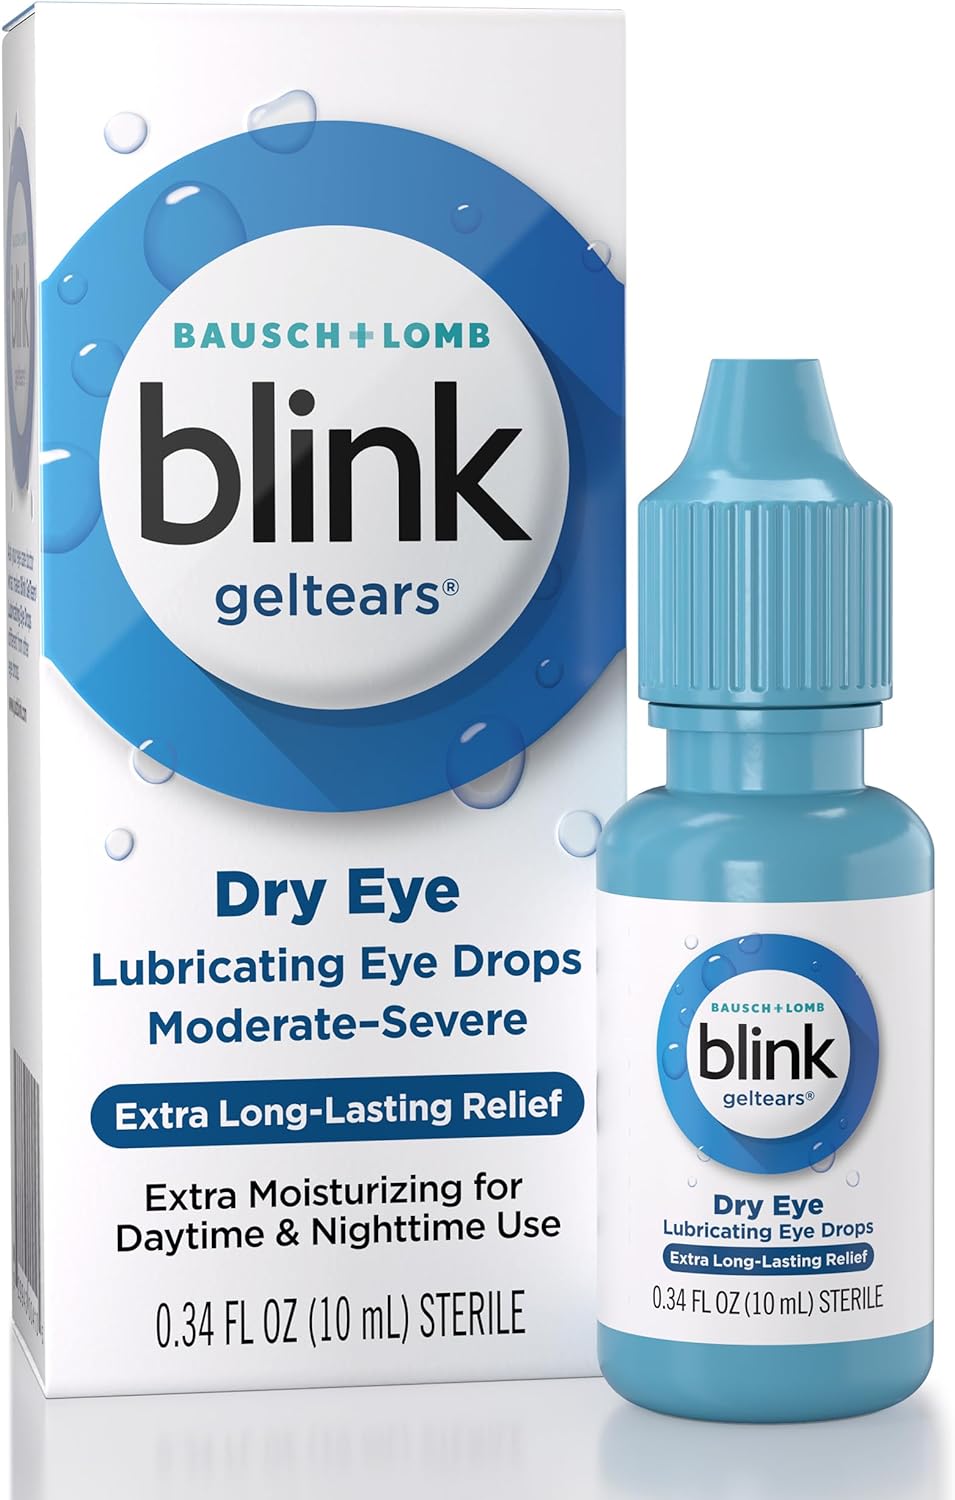 This product alleviates symptoms of my dry eye. It is moisturizing and works well for me.